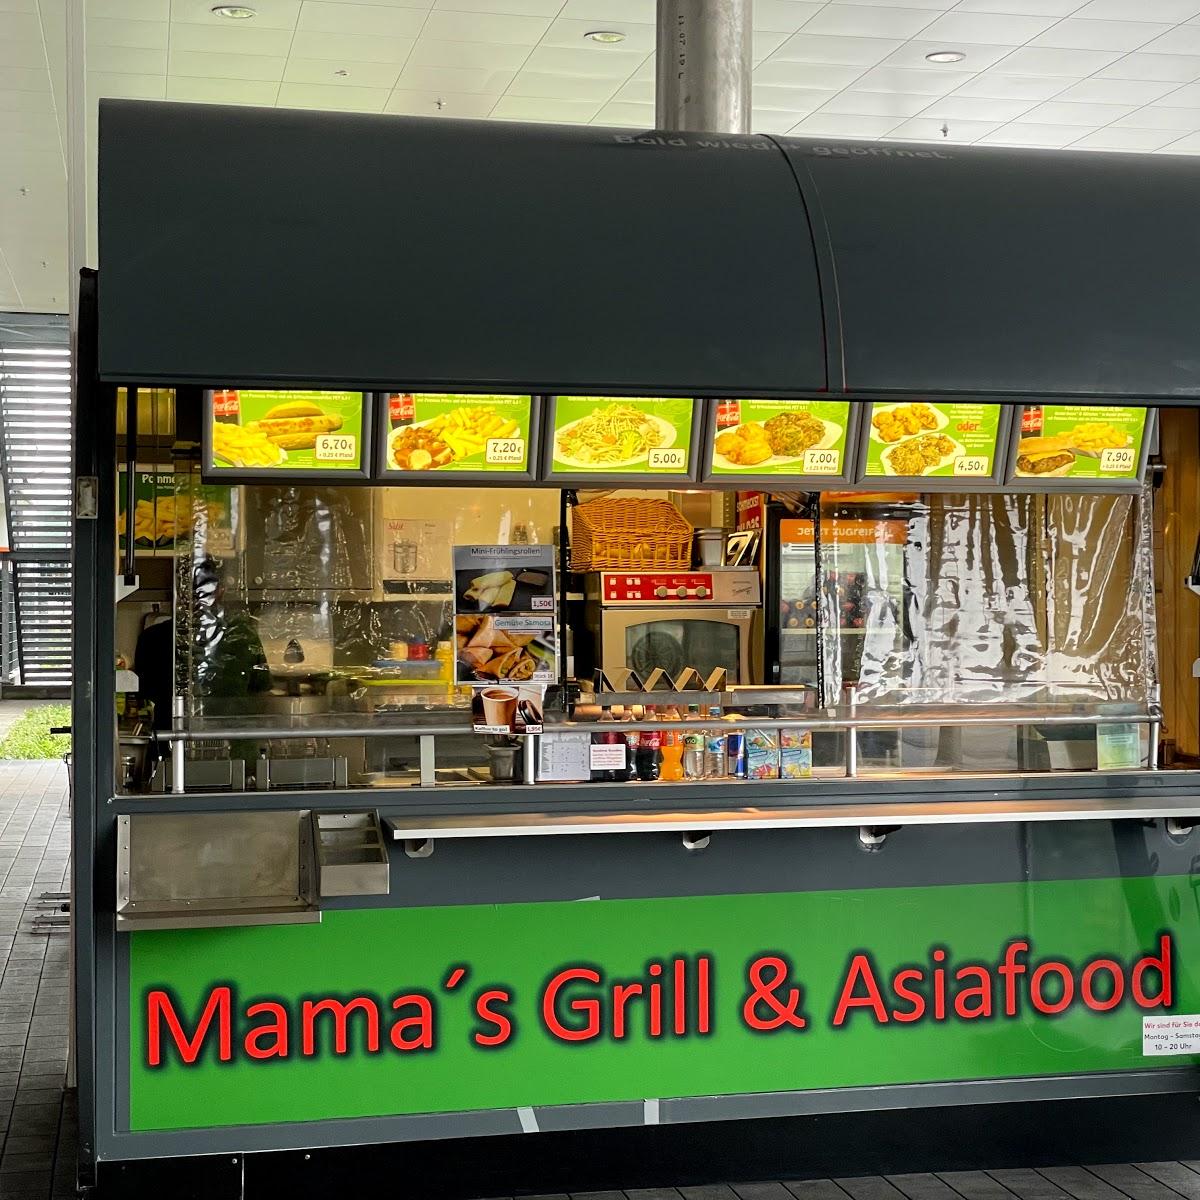 Restaurant "Mama‘s Grill und Asiafood" in Backnang